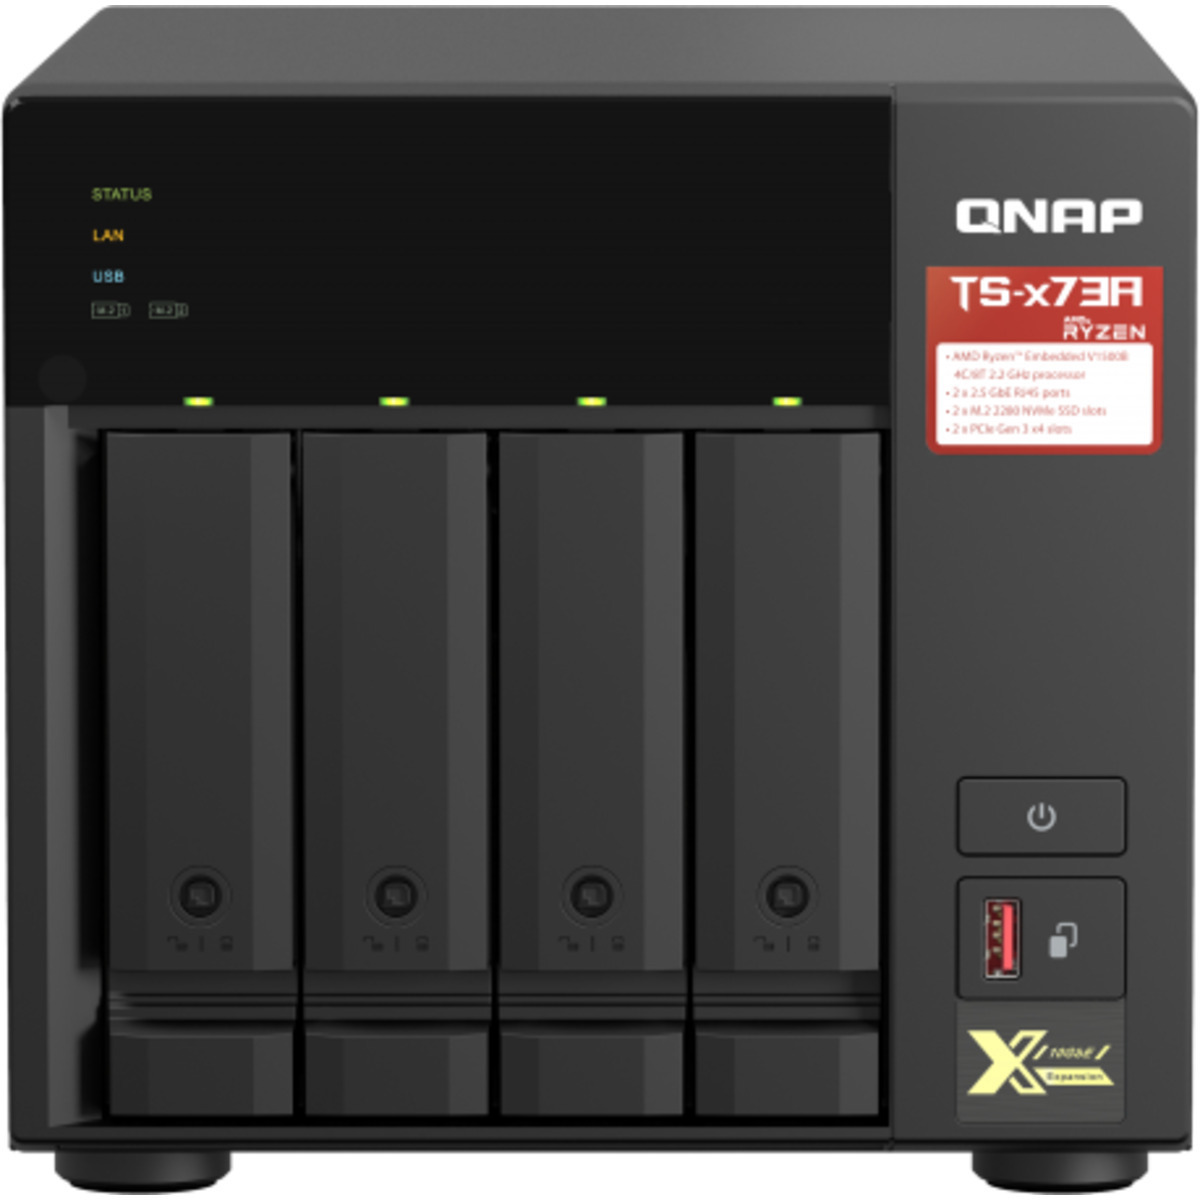 buy QNAP TS-473A 16tb Desktop NAS - Network Attached Storage Device 4x4000gb Seagate BarraCuda ST4000DM004 3.5 7200rpm SATA 6Gb/s HDD CONSUMER Class Drives Installed - Burn-In Tested - nas headquarters buy network attached storage server device das new raid-5 free shipping simply usa christmas holiday black friday cyber monday week sale happening now! TS-473A